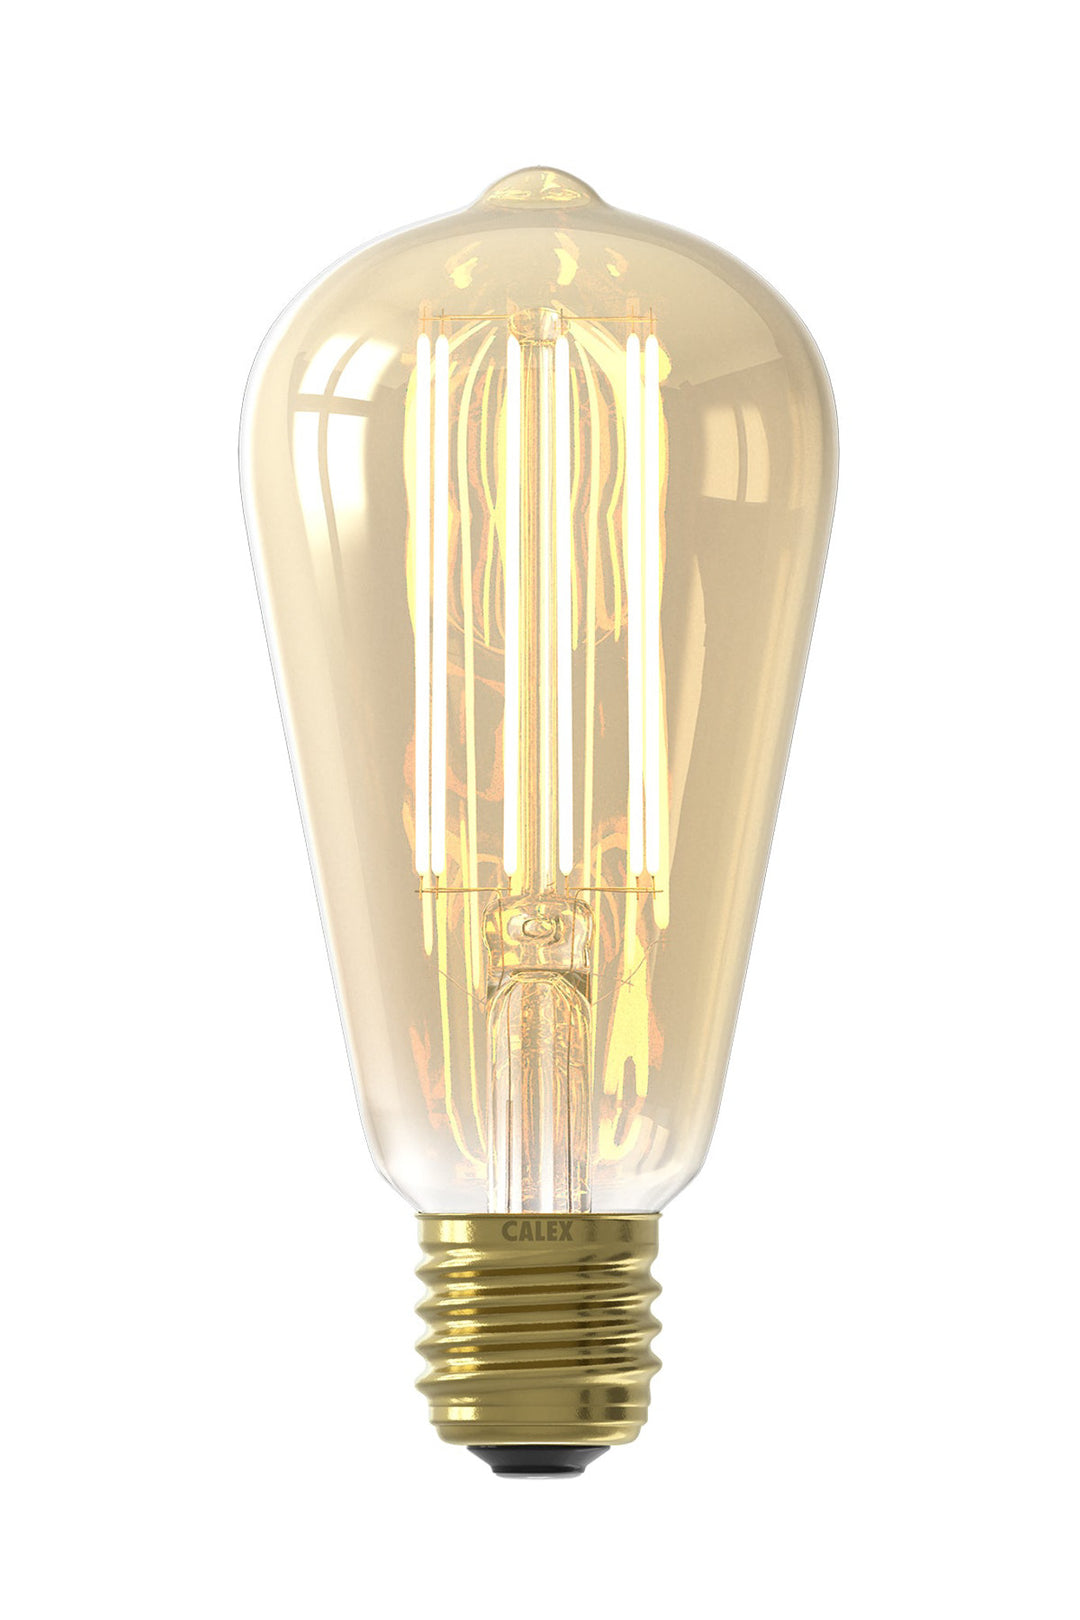 Calex LED Warm Filament Rustic Lamp ST64, Gold, E27, Dimmable 1101001800